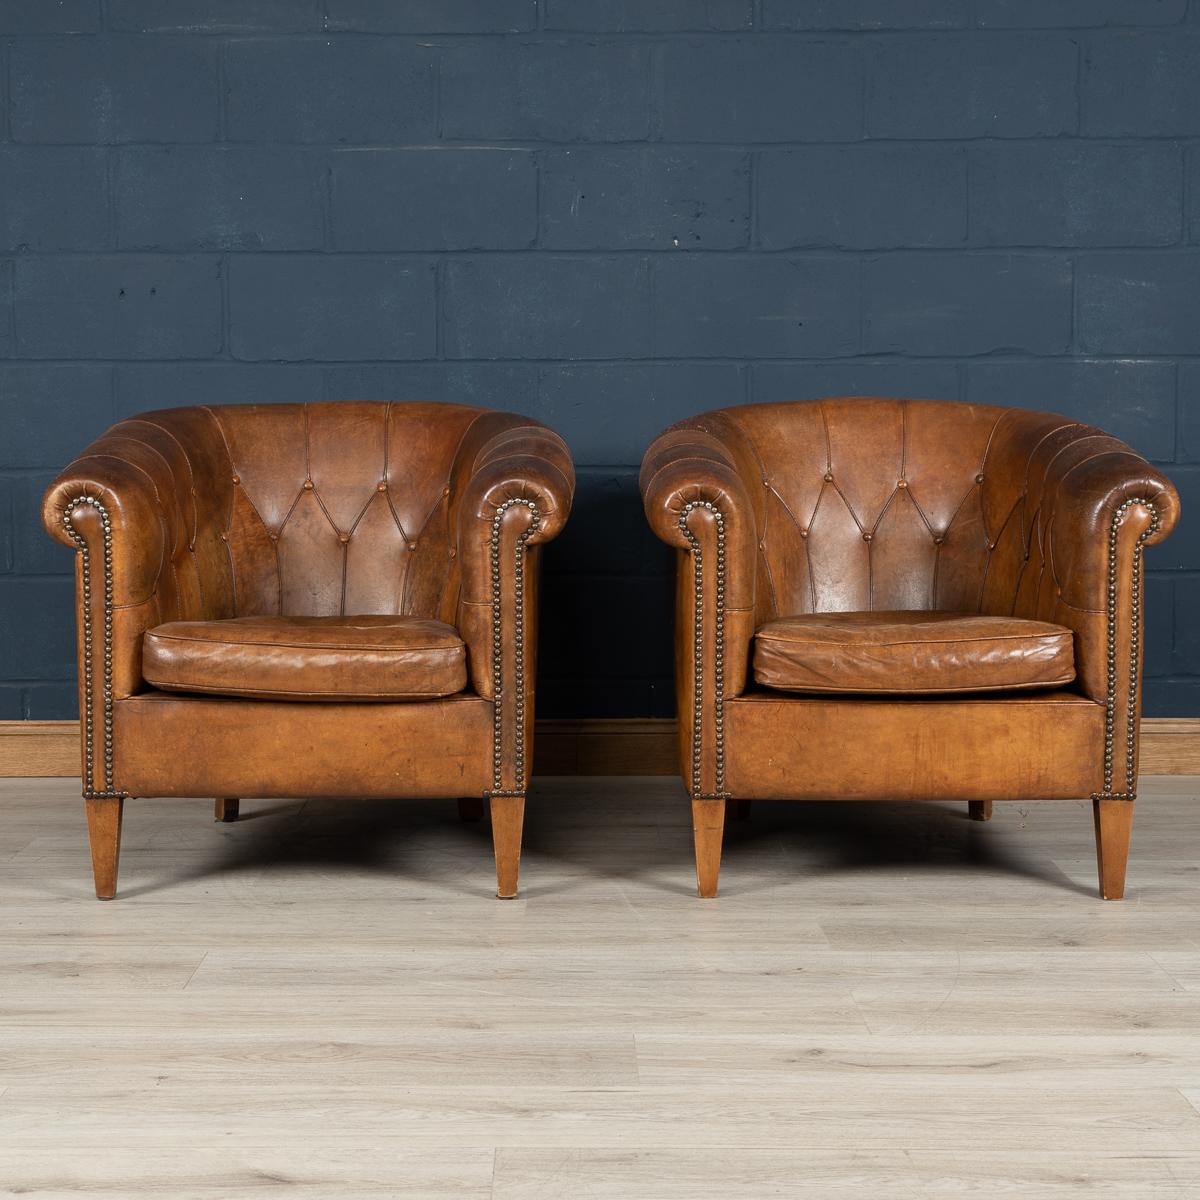 A wonderful pair of sheepskin leather tub chairs, mid-late 20th century, manufactured in Holland and of the finest quality with great patina. Lovely rich color, button back, very unusual model.

Please note that our interior pieces are located at